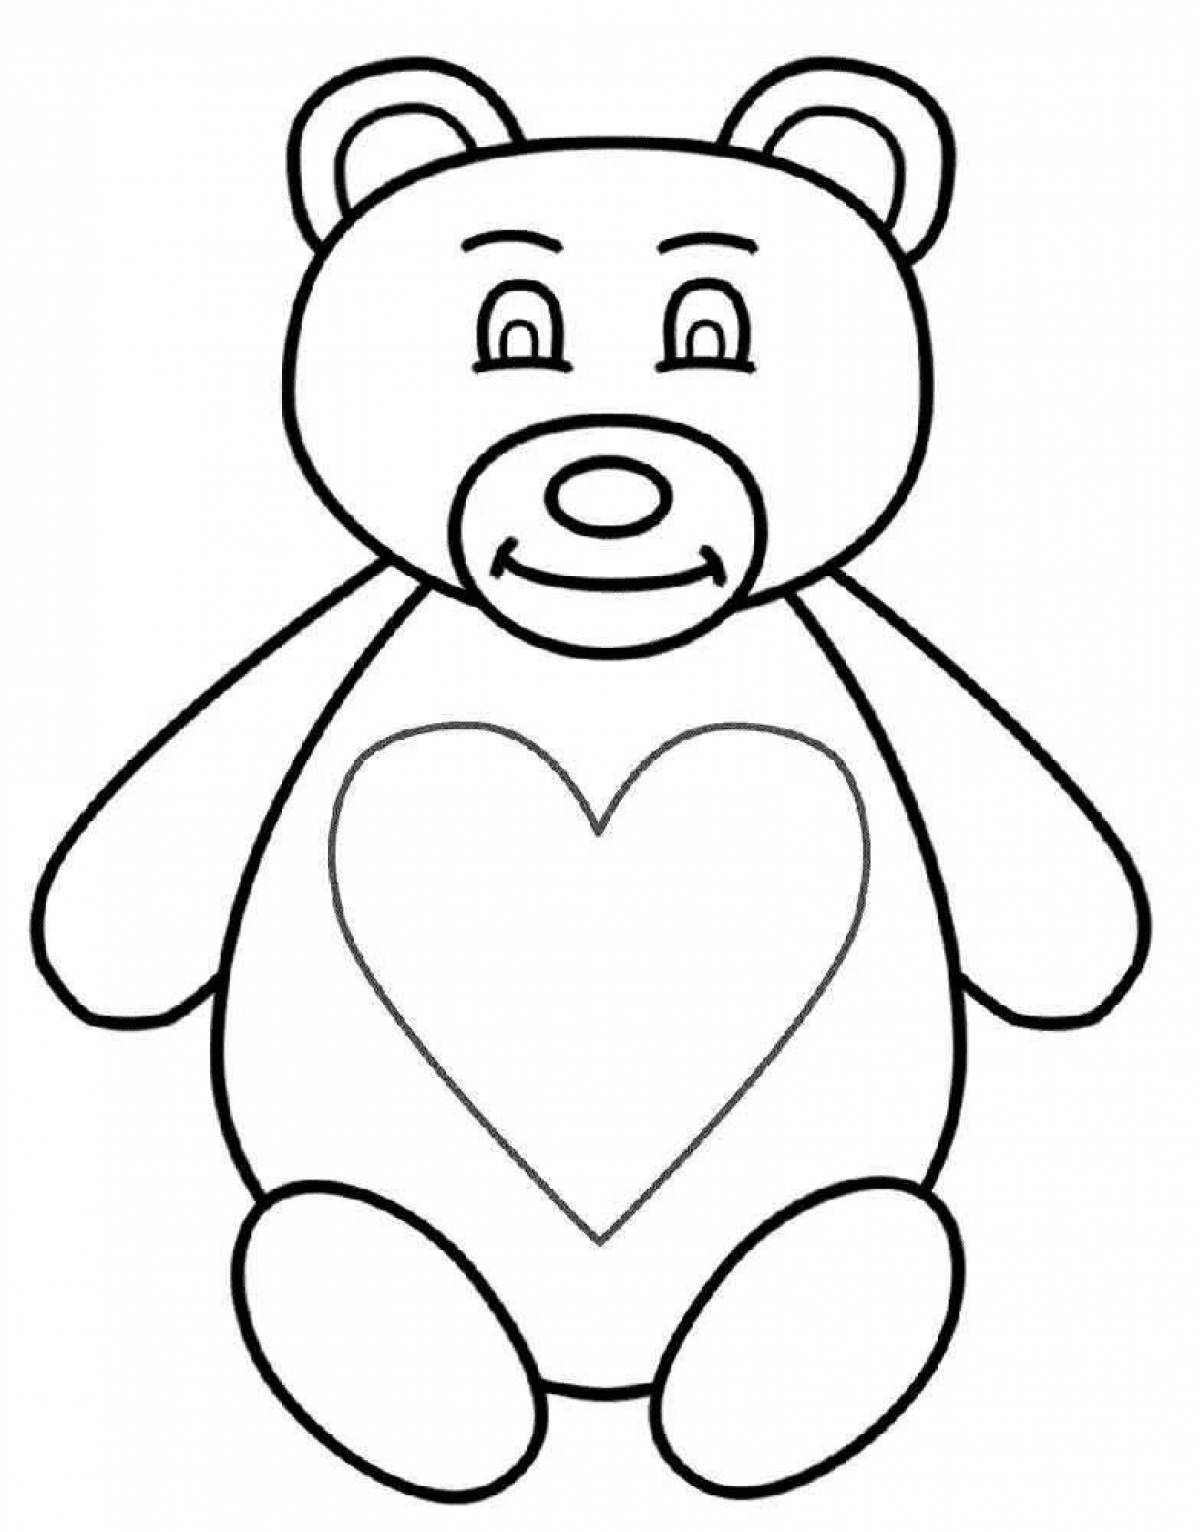 Excited bear coloring page